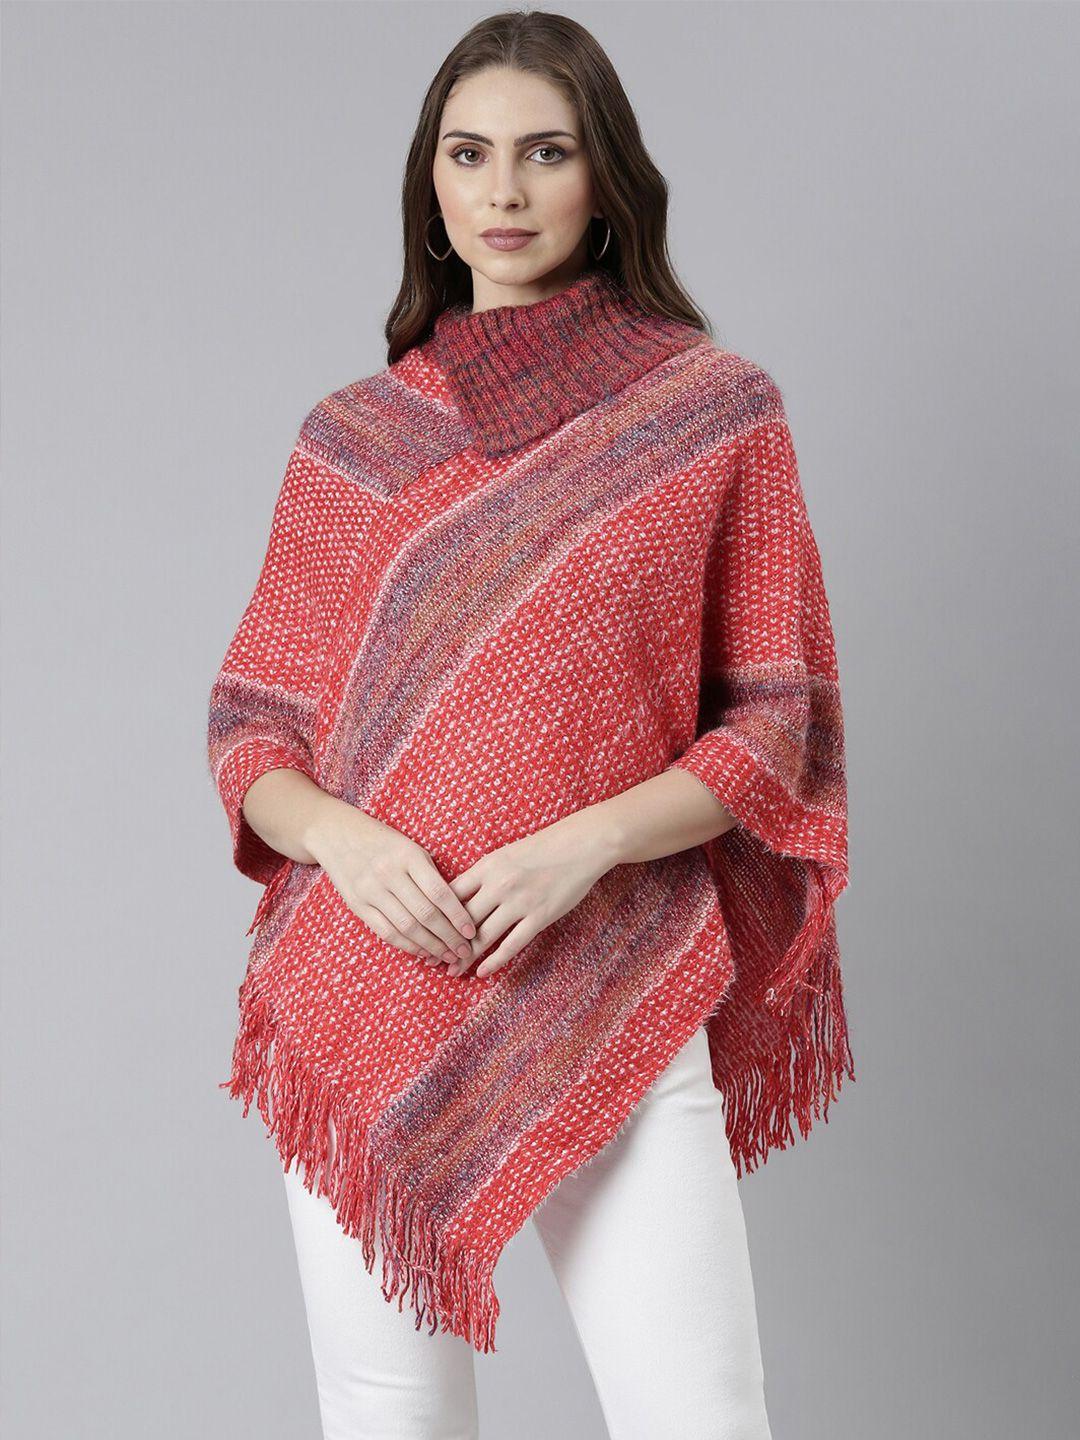 showoff speckled turtle neck acrylic poncho with fringed detail